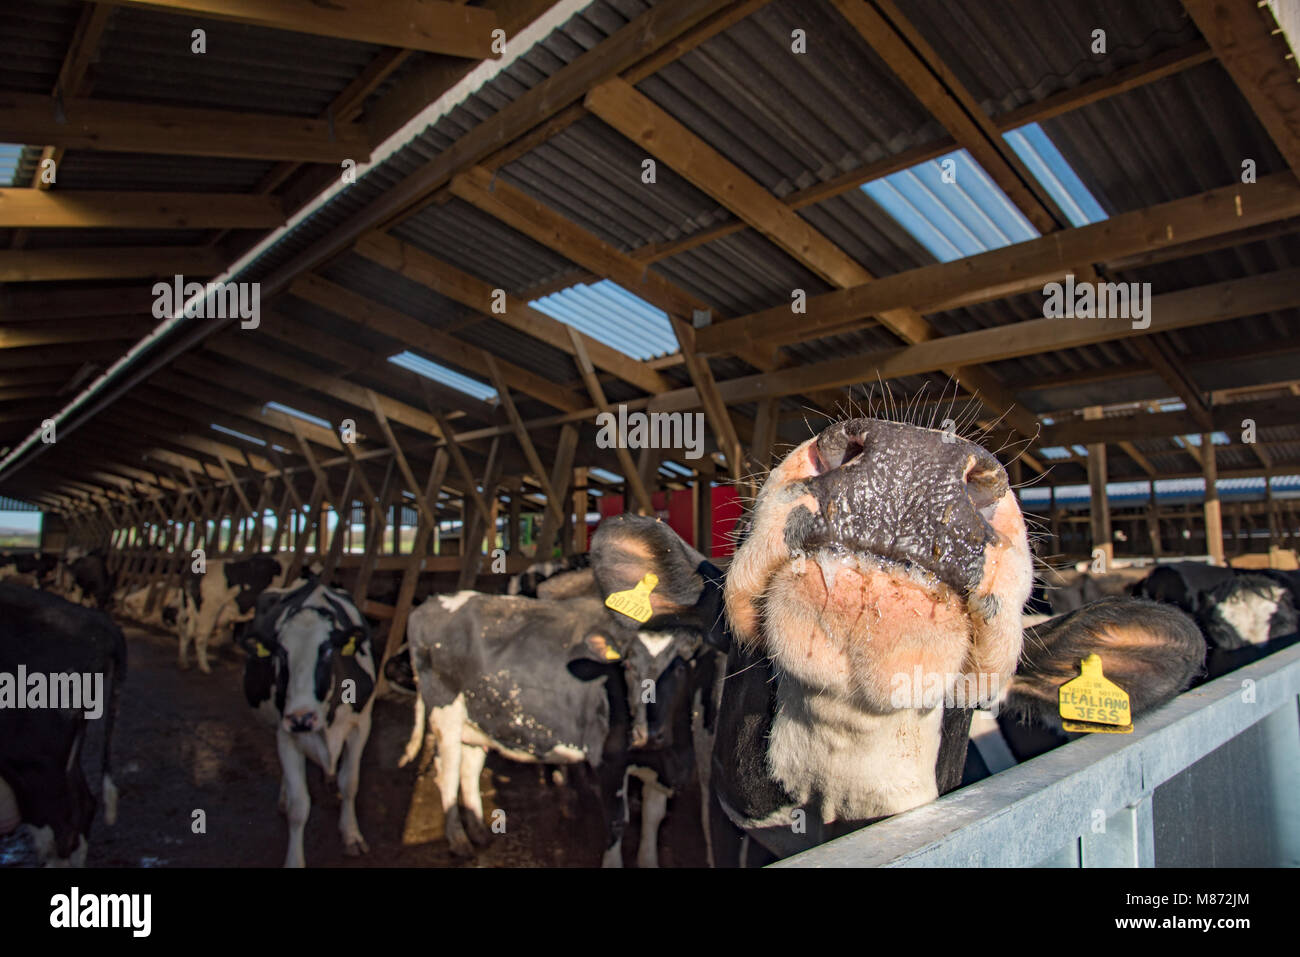 Close-up of the nose of a dairy cow in a farm building, Bury, Greater Manchester, England. Stock Photo